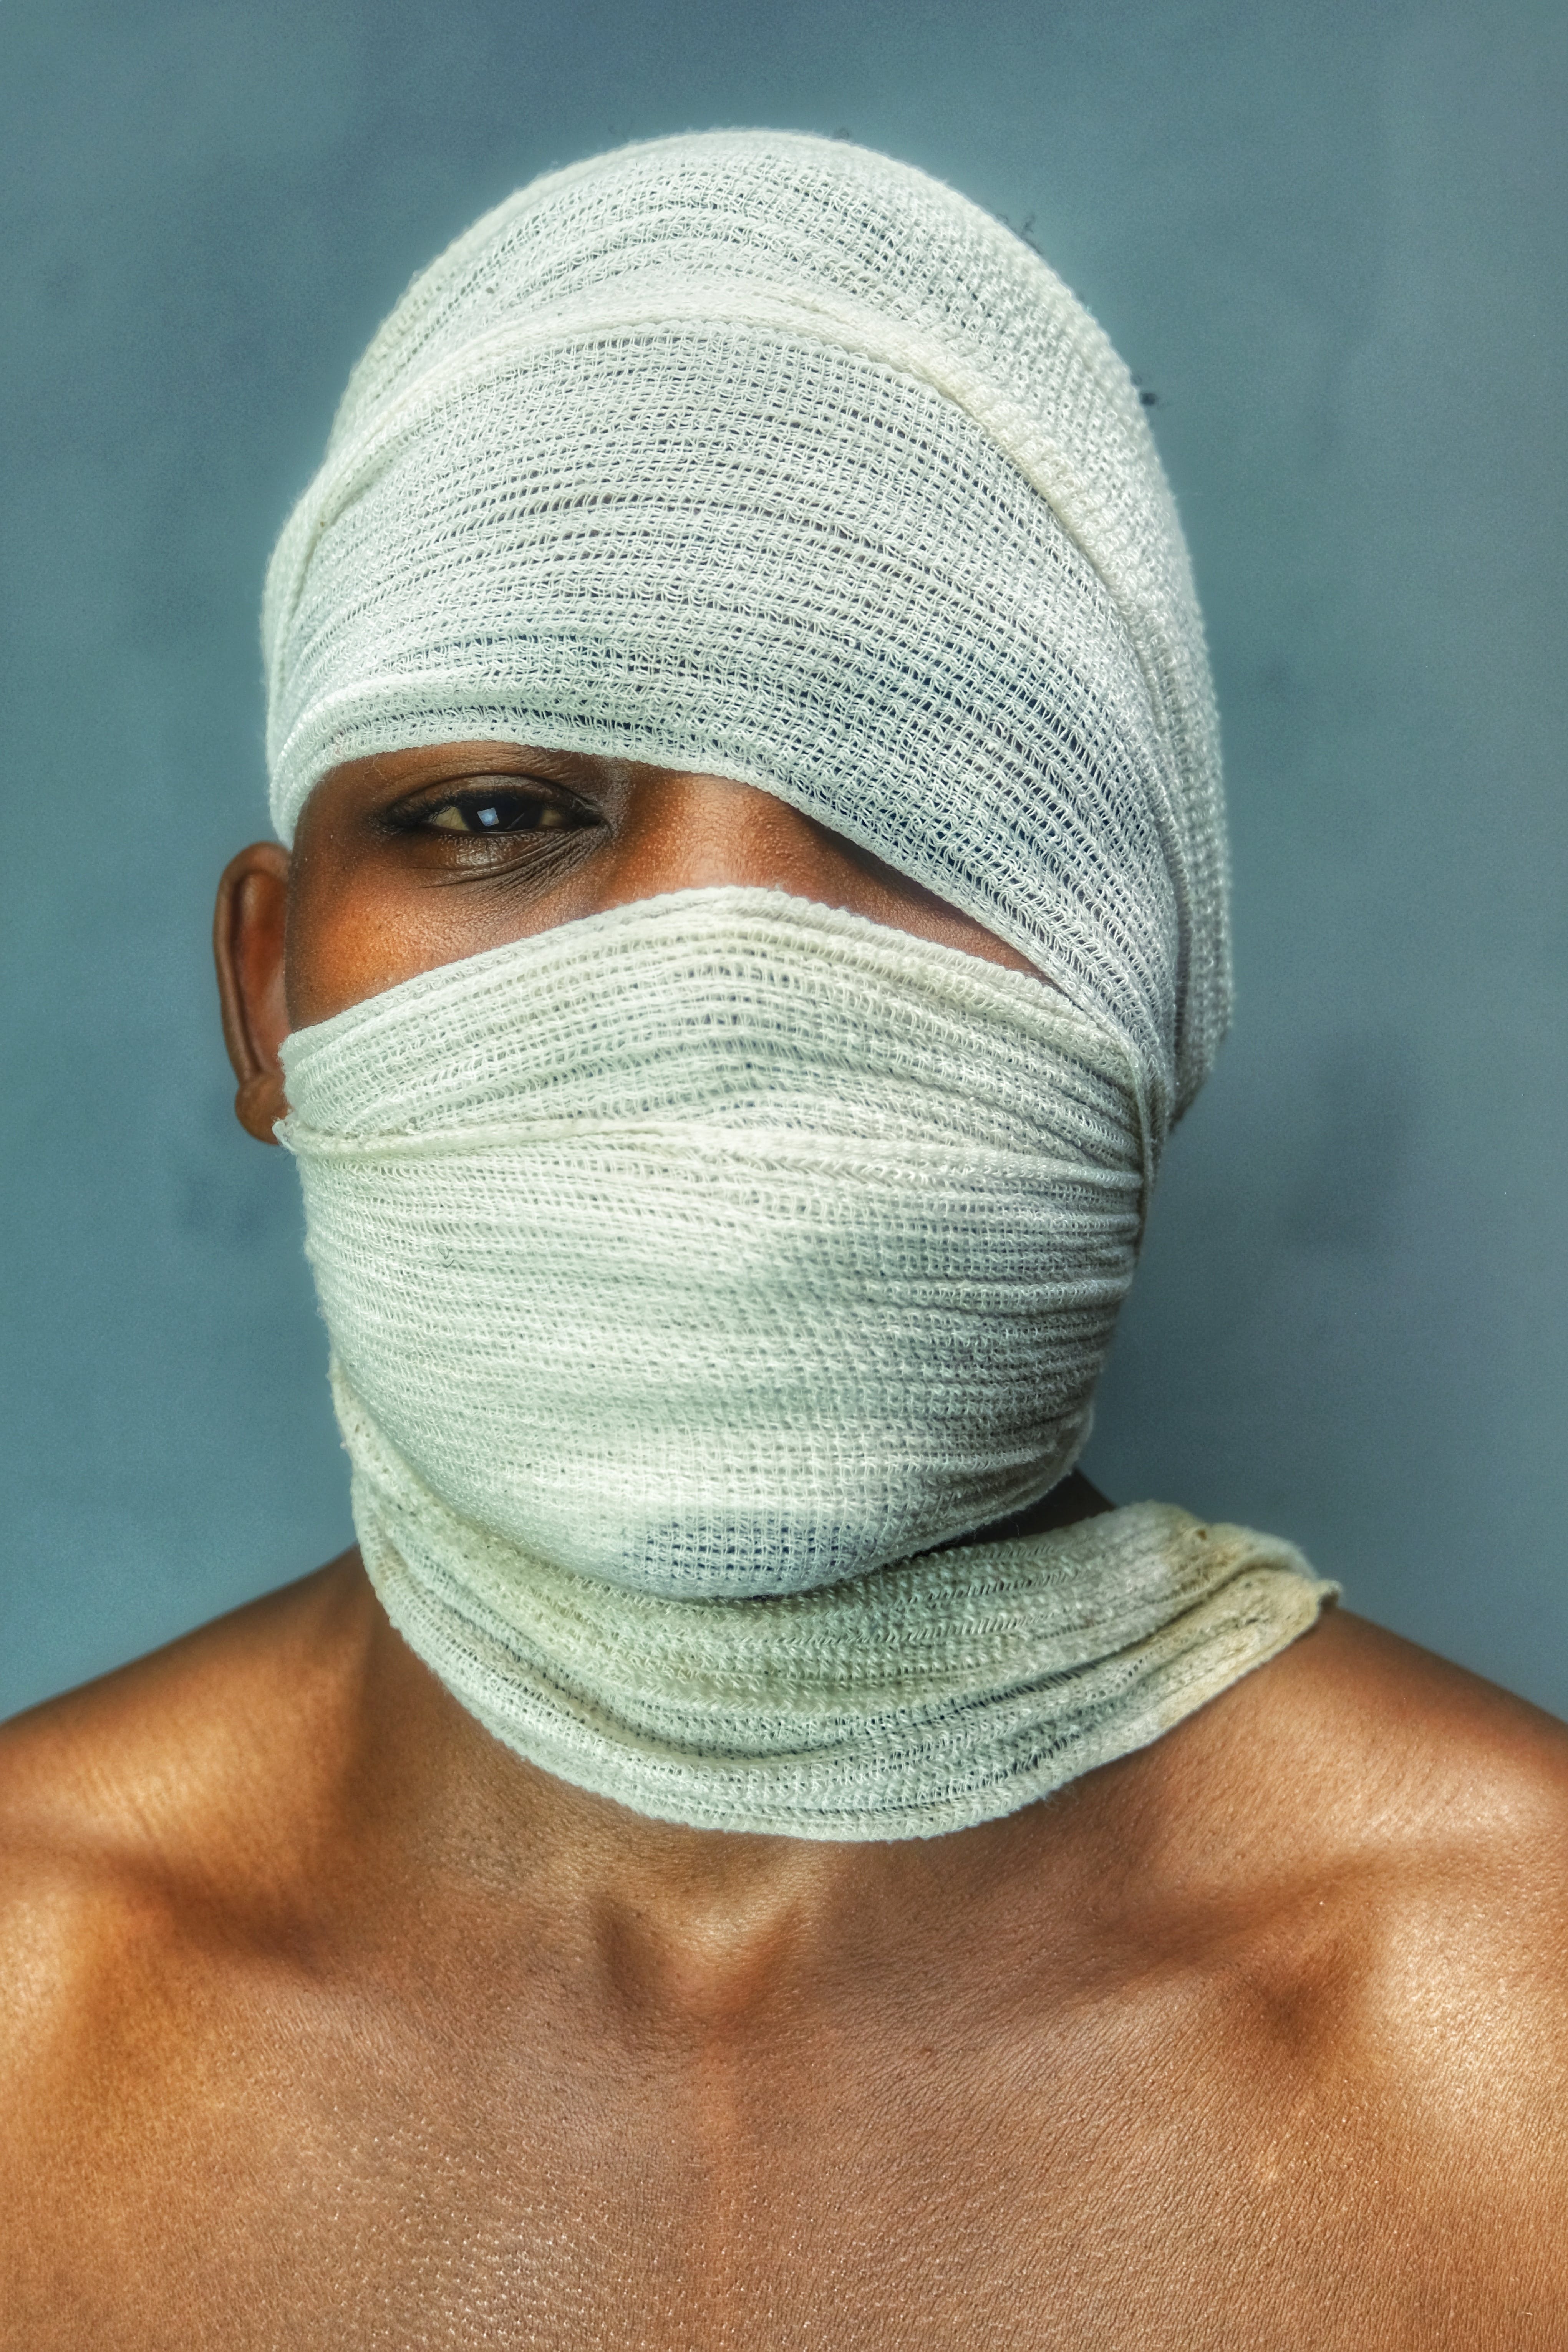 A person with a bandage covered all over his face. | Source: Pexels